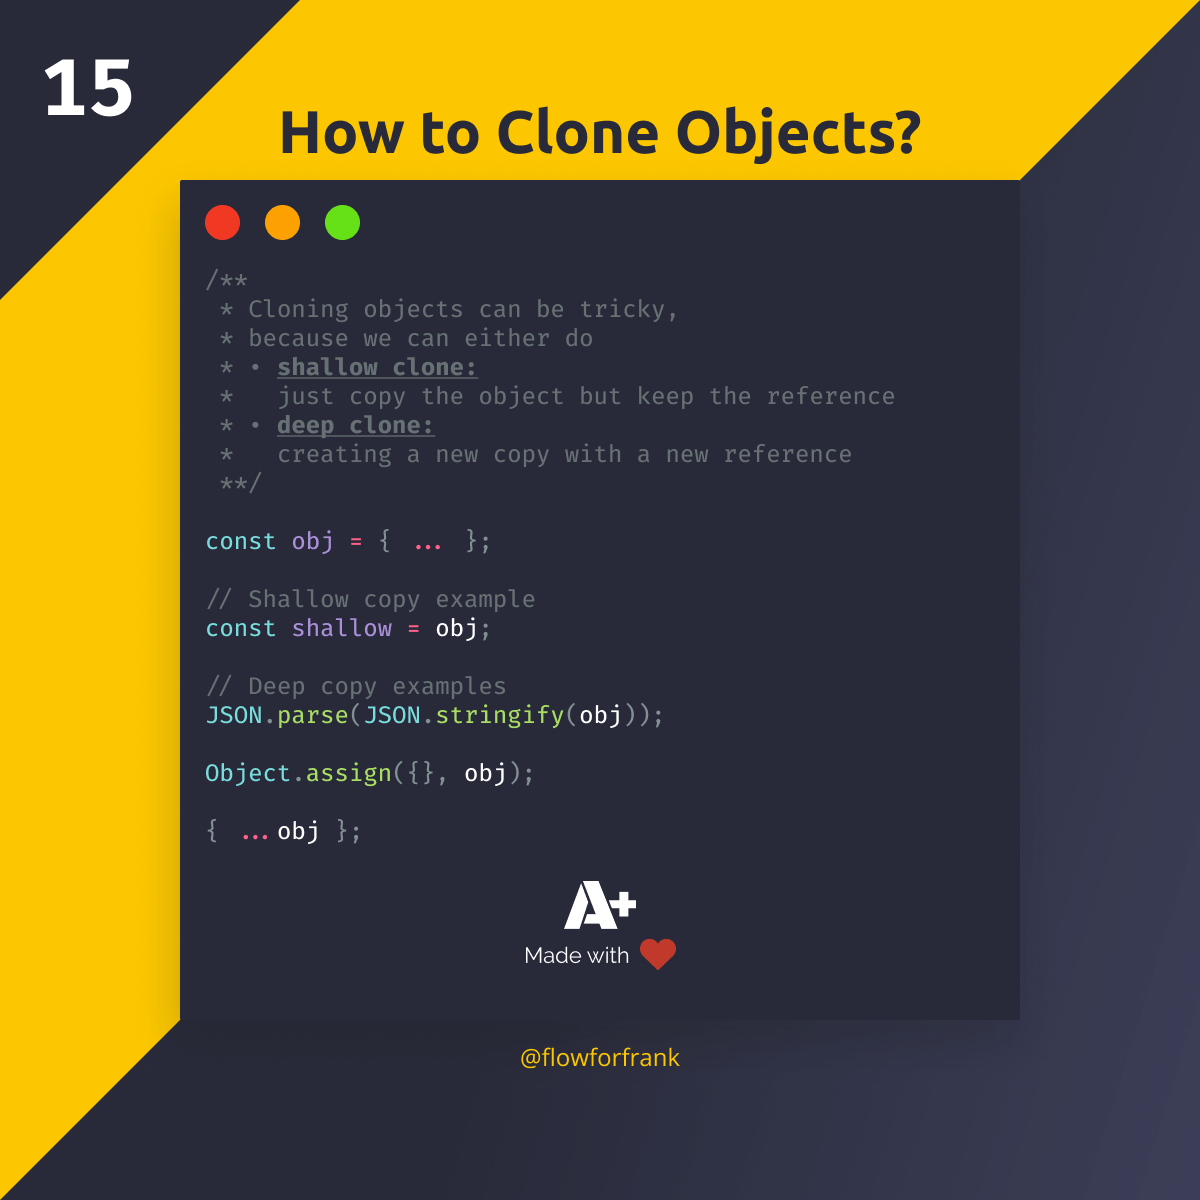 How you can clone objects in JavaScript